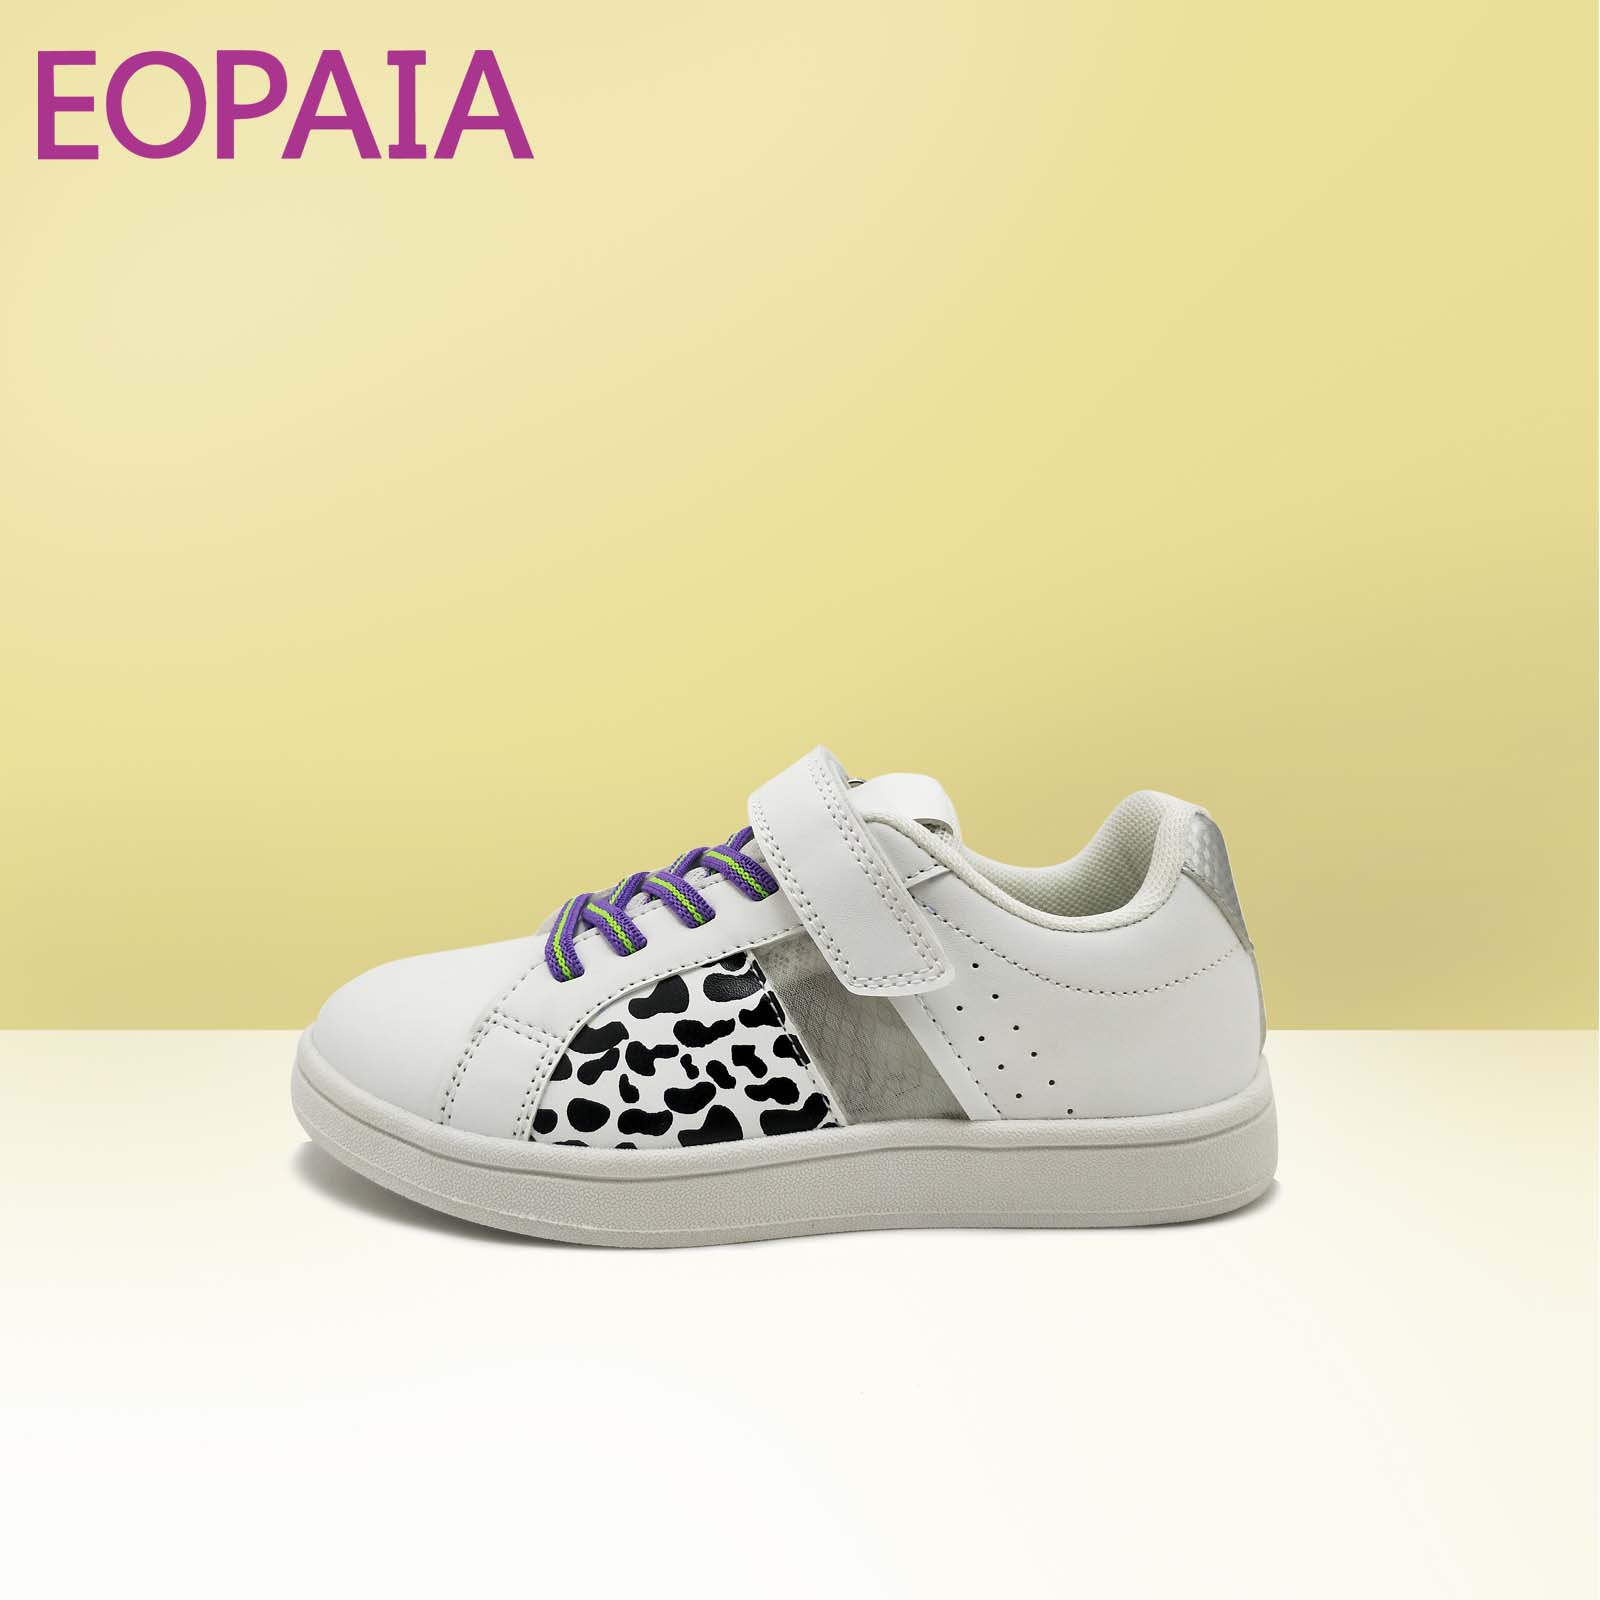 Chaussures d'enfants Chaussures PU Chaussures Chaussures Sport Chaussures Casual Chaussures de mode Chaussures respirantes Sneaker School Chaussures Chaussures Velcro